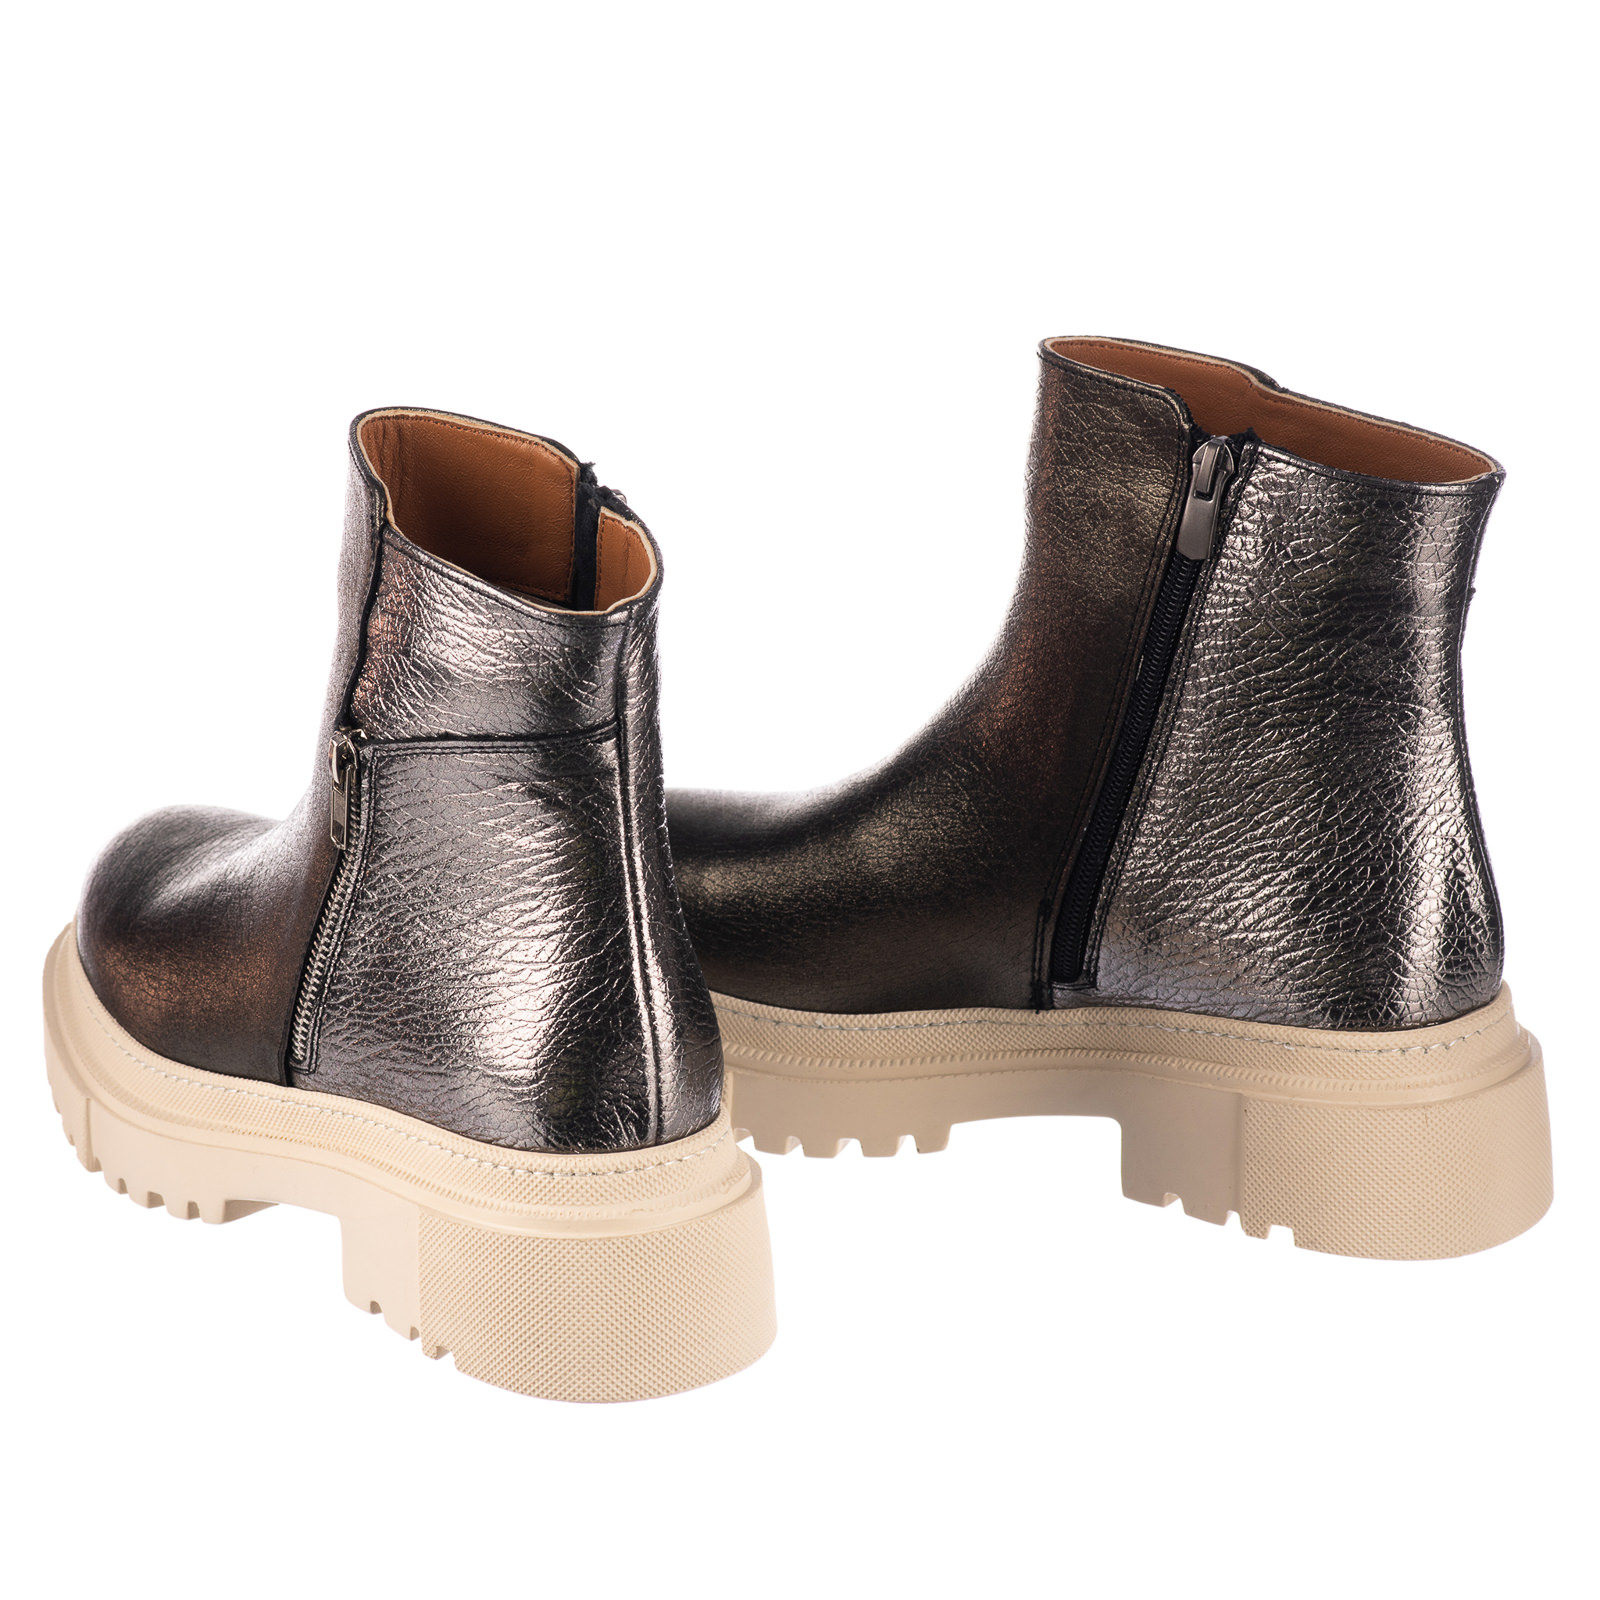 Leather ankle boots B686 - GRAFIT